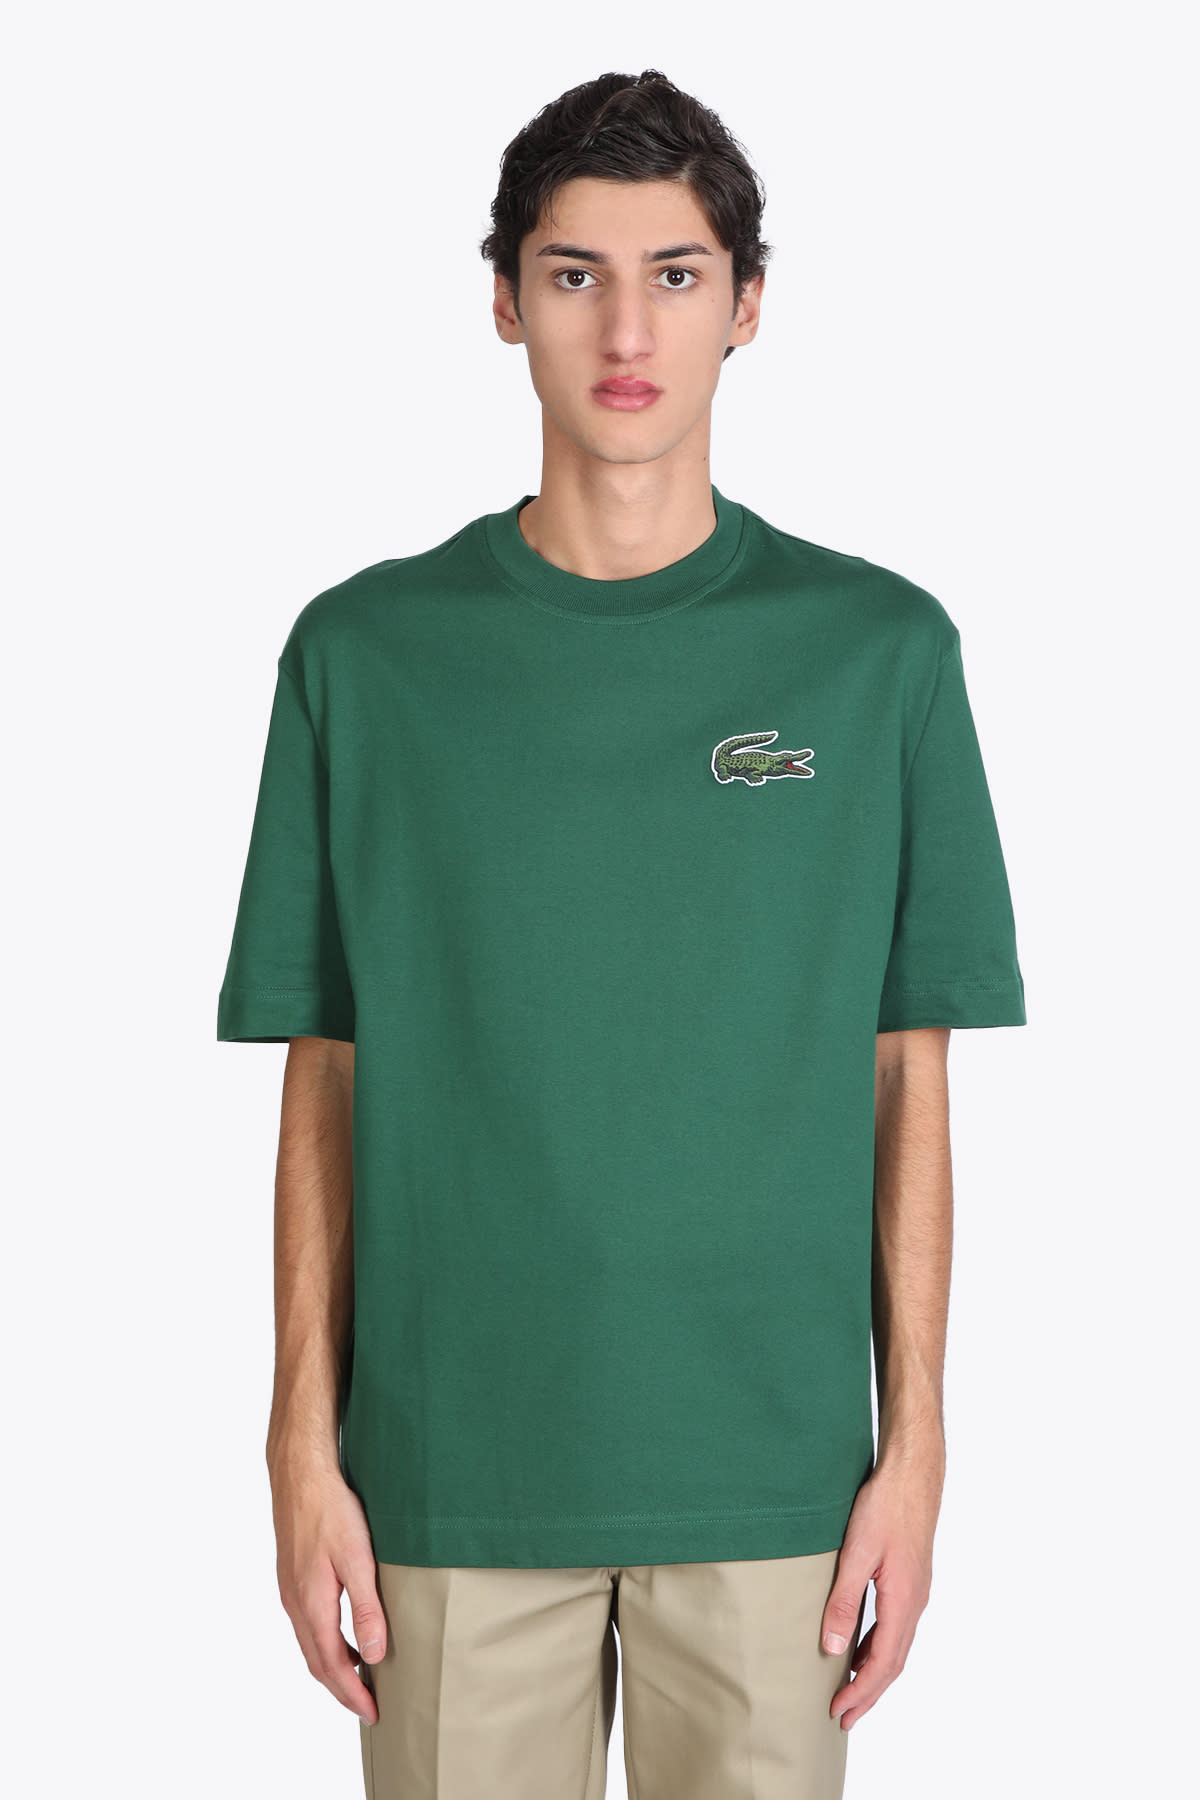 Lacoste T-shirt Green cotton oversized t-shirt with big crocodile patch.